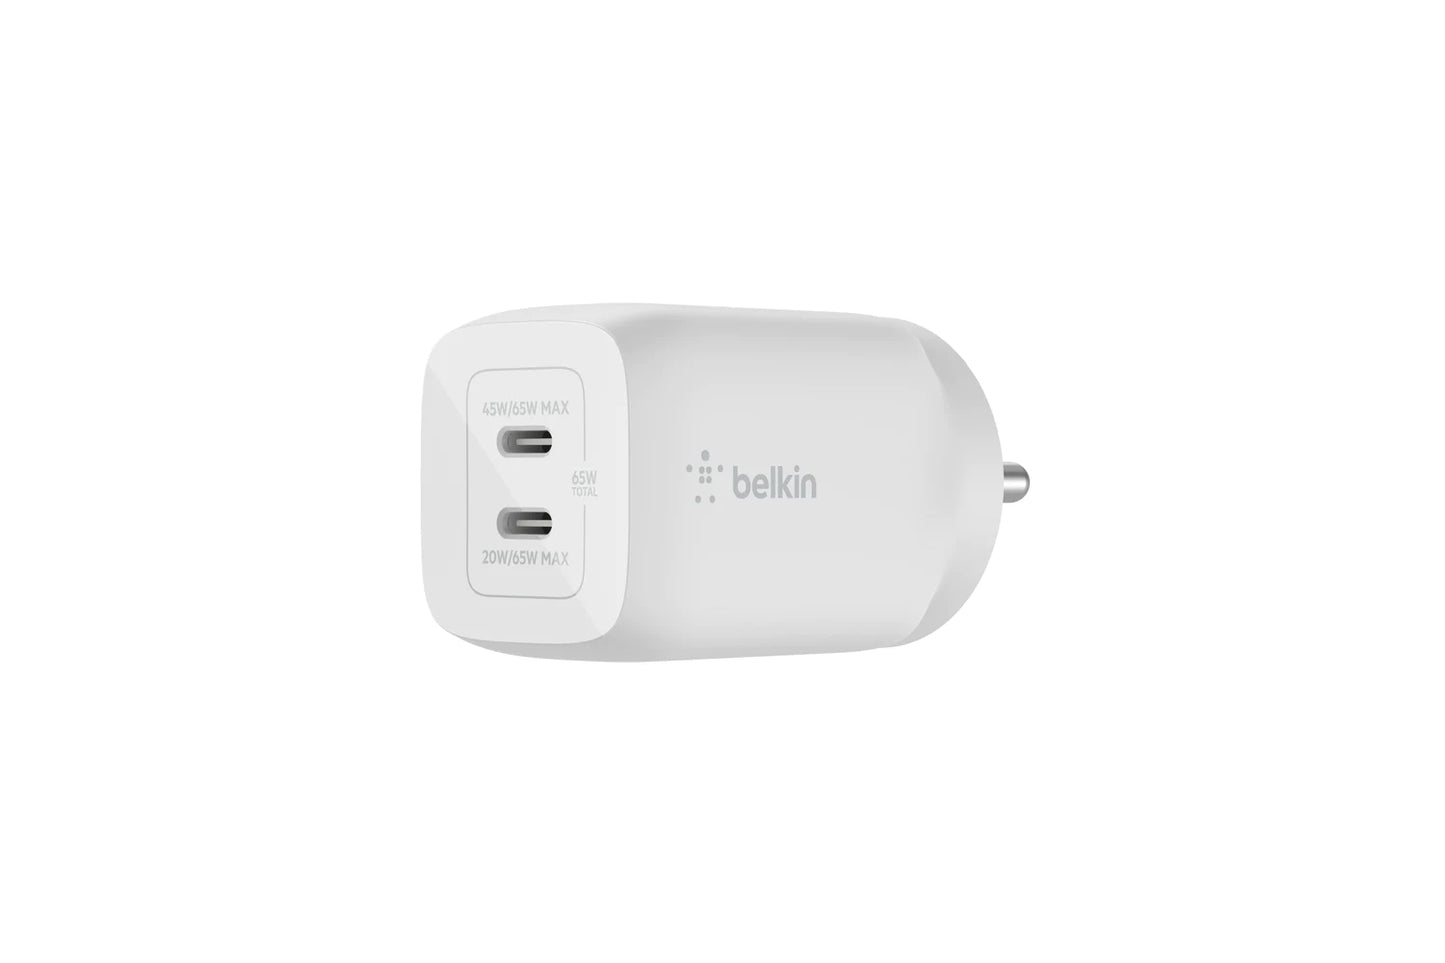 Belkin 65W GaN Dual USB C PD 3.0 Fast Charger with PPS Technology, Compact Size, USB-C, Type C Fast Charger for iPhone, MacBook Air, iPad Pro, Pixel, Galaxy, More Devices – White